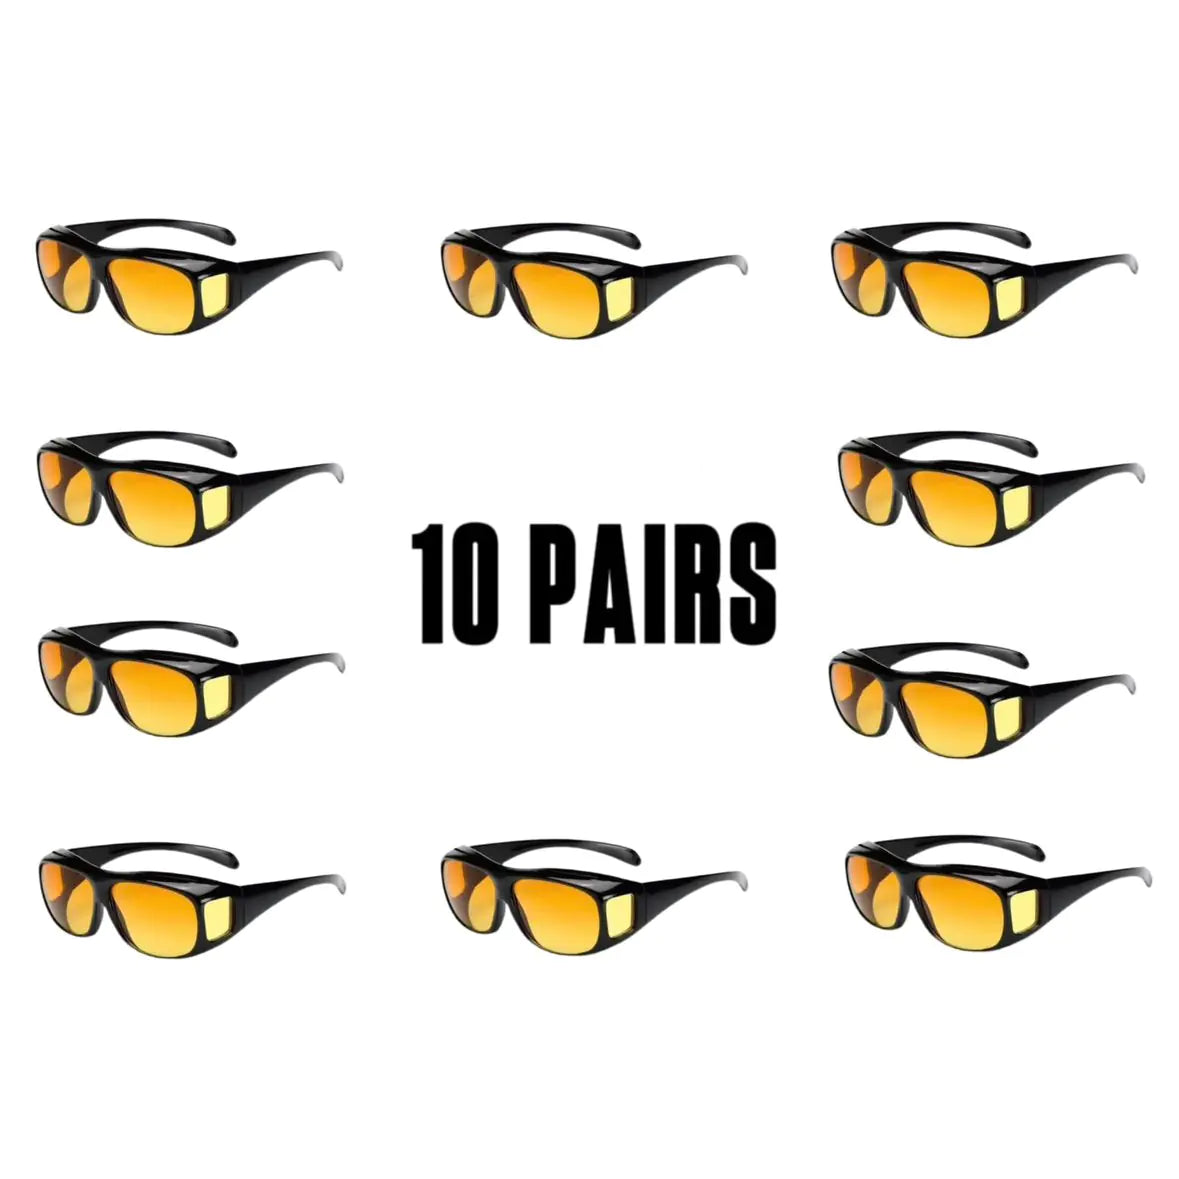 Night Vision Glare Cut Headlight Glasses Black/Gold BUY 5 GET 5 FREE-10 pairs💥FOR 99.95